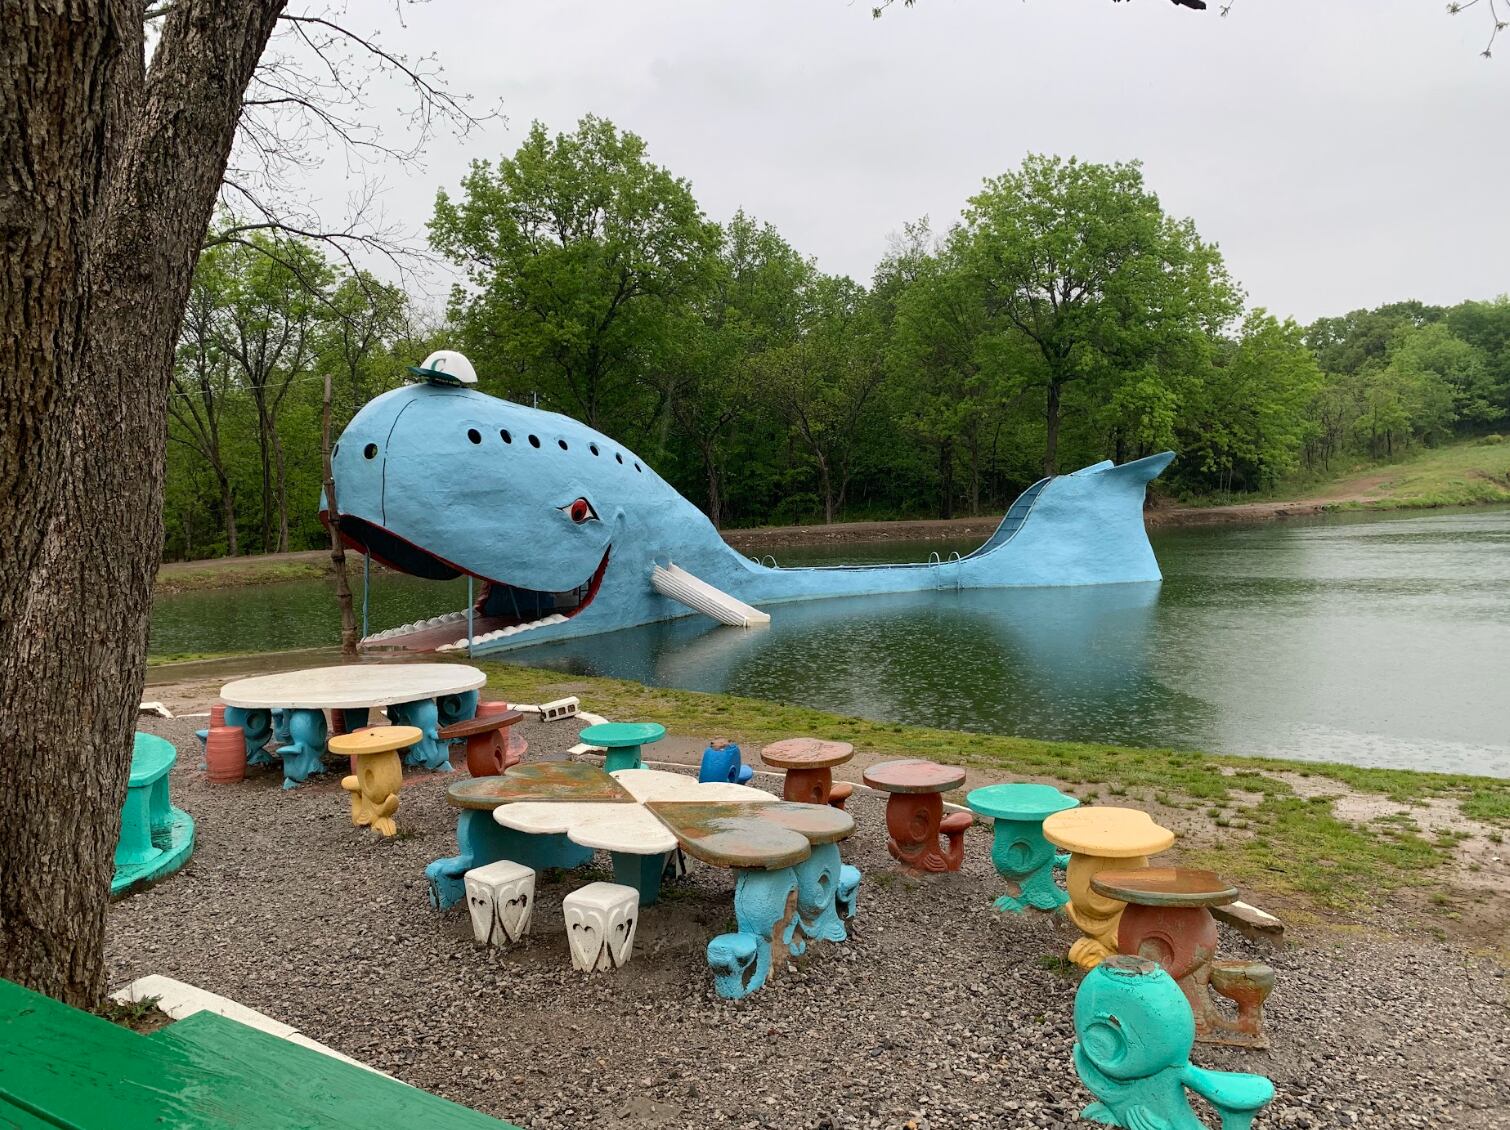 The famed Blue Whale of Catoosa still draws many visitors and photographers every year to this rural Oklahoma swimming hole.